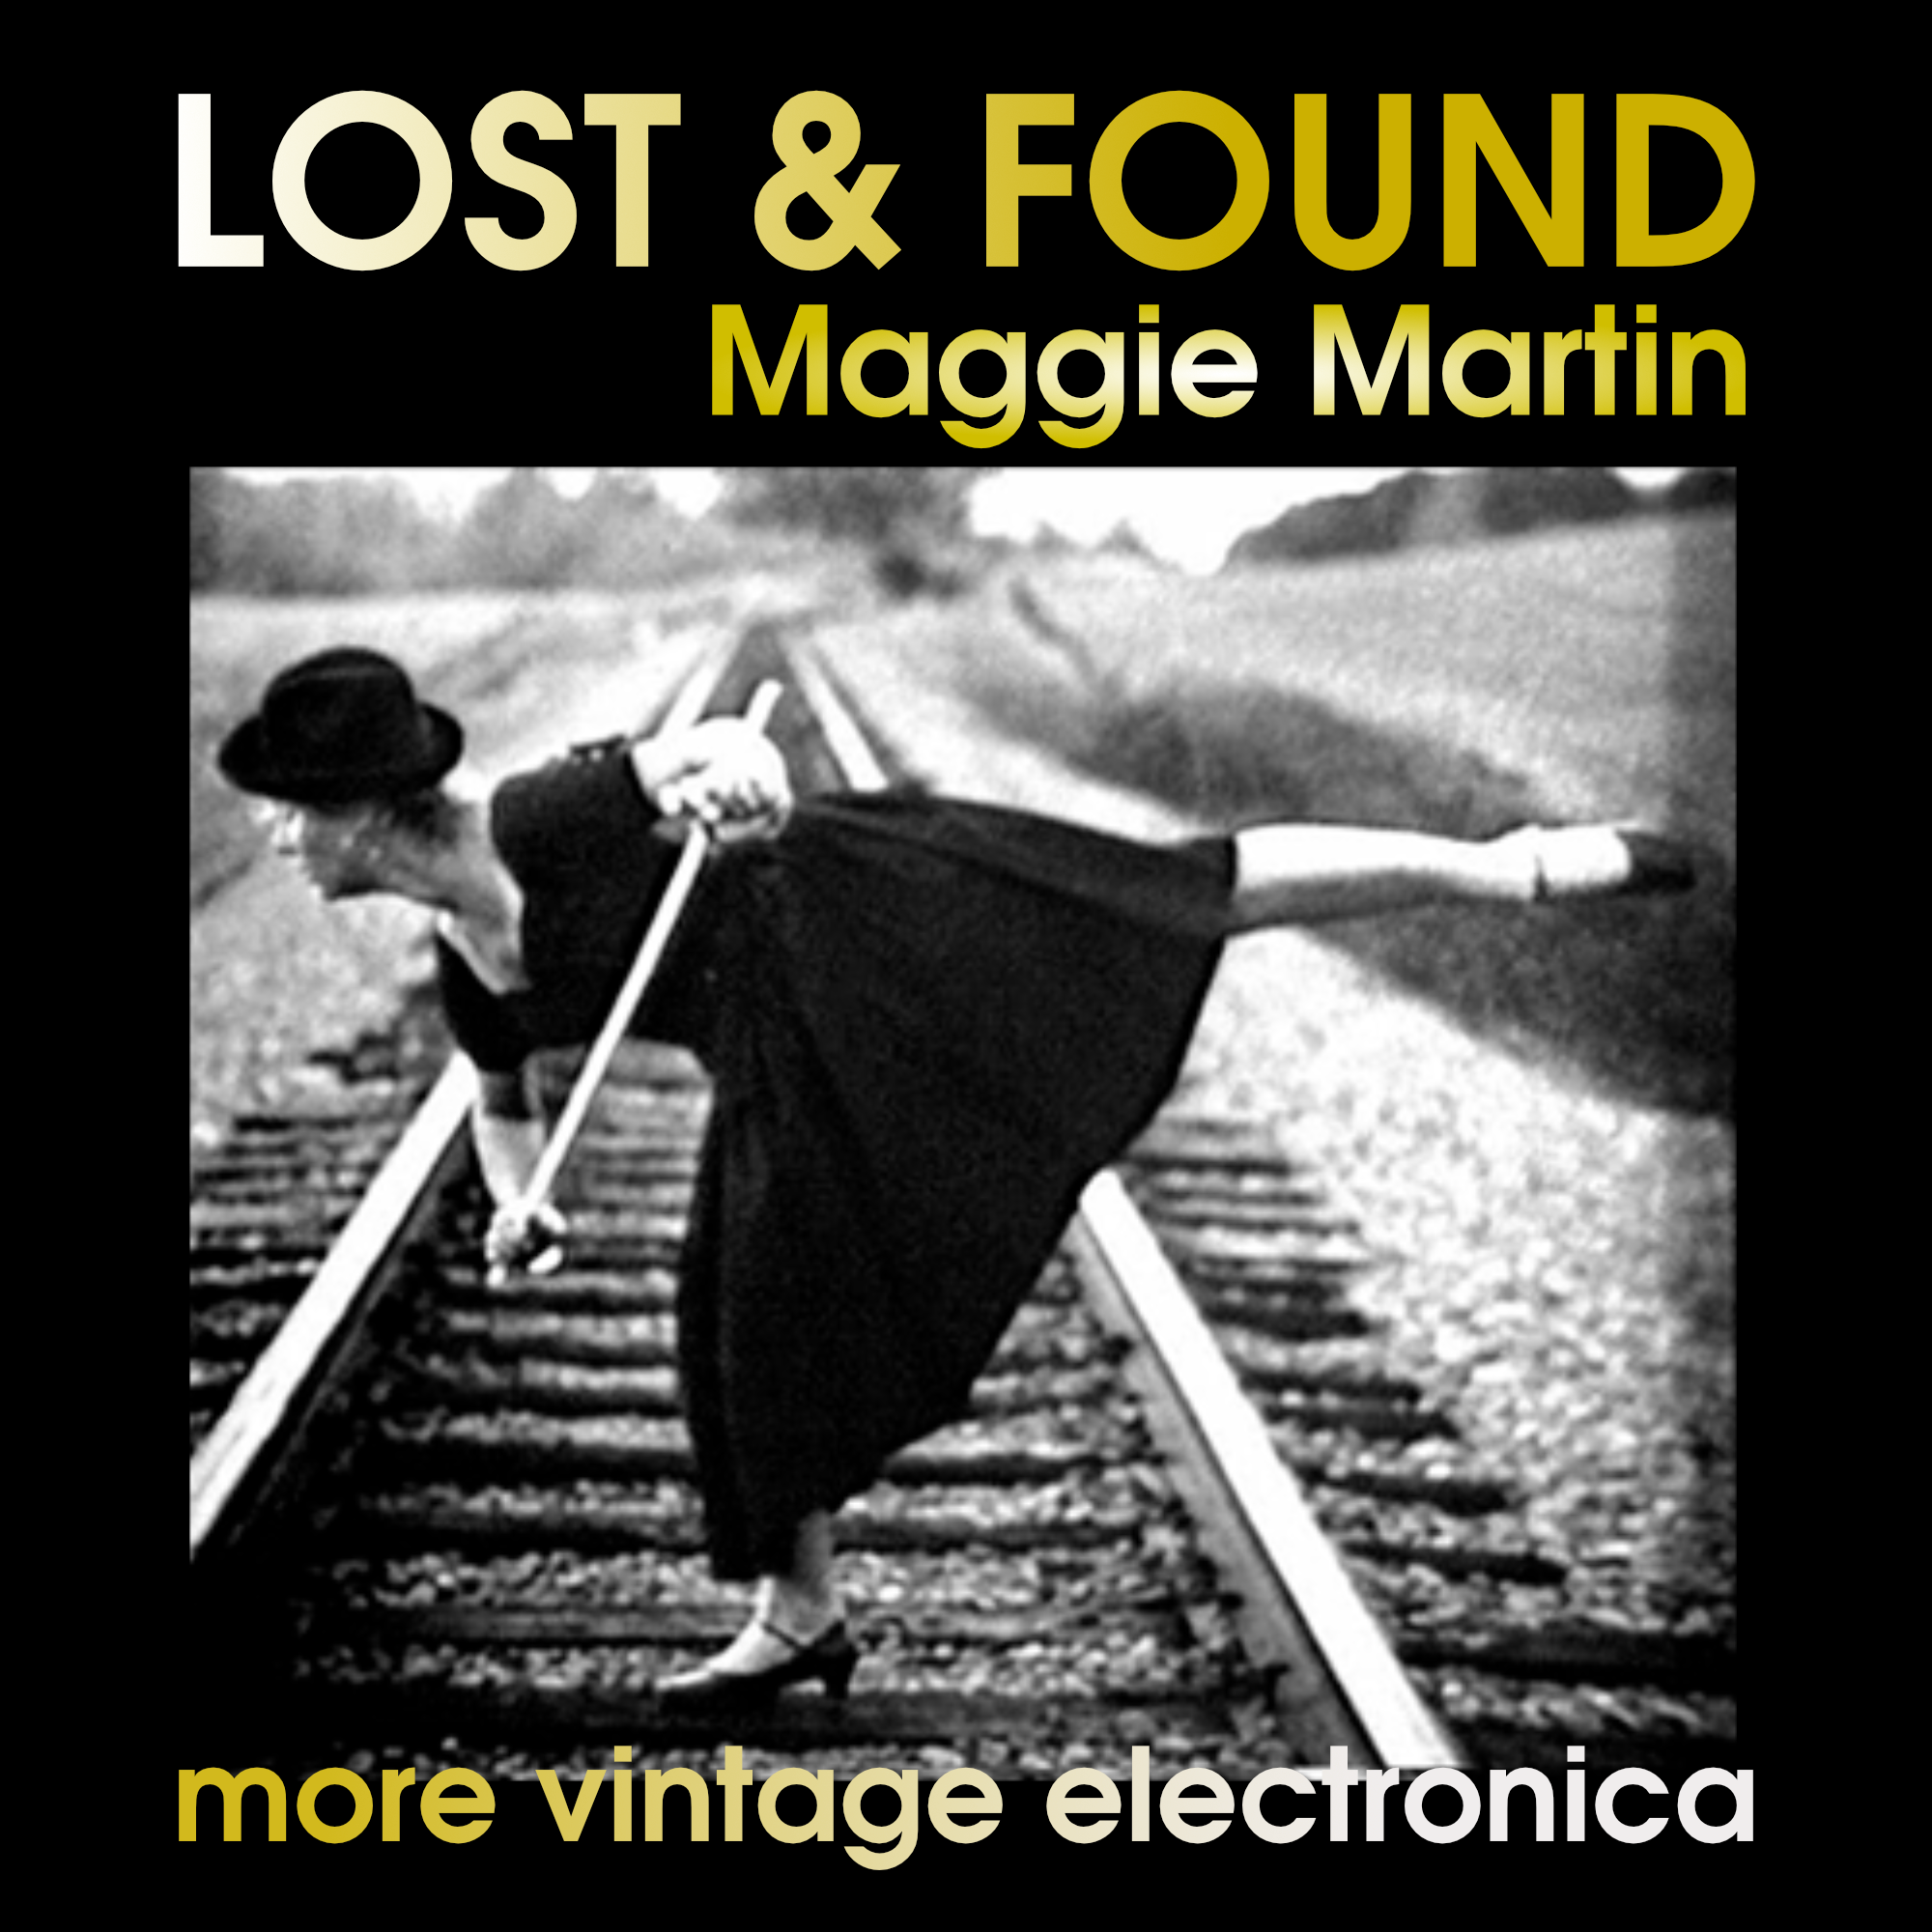 Mags’ Vintage Electronica